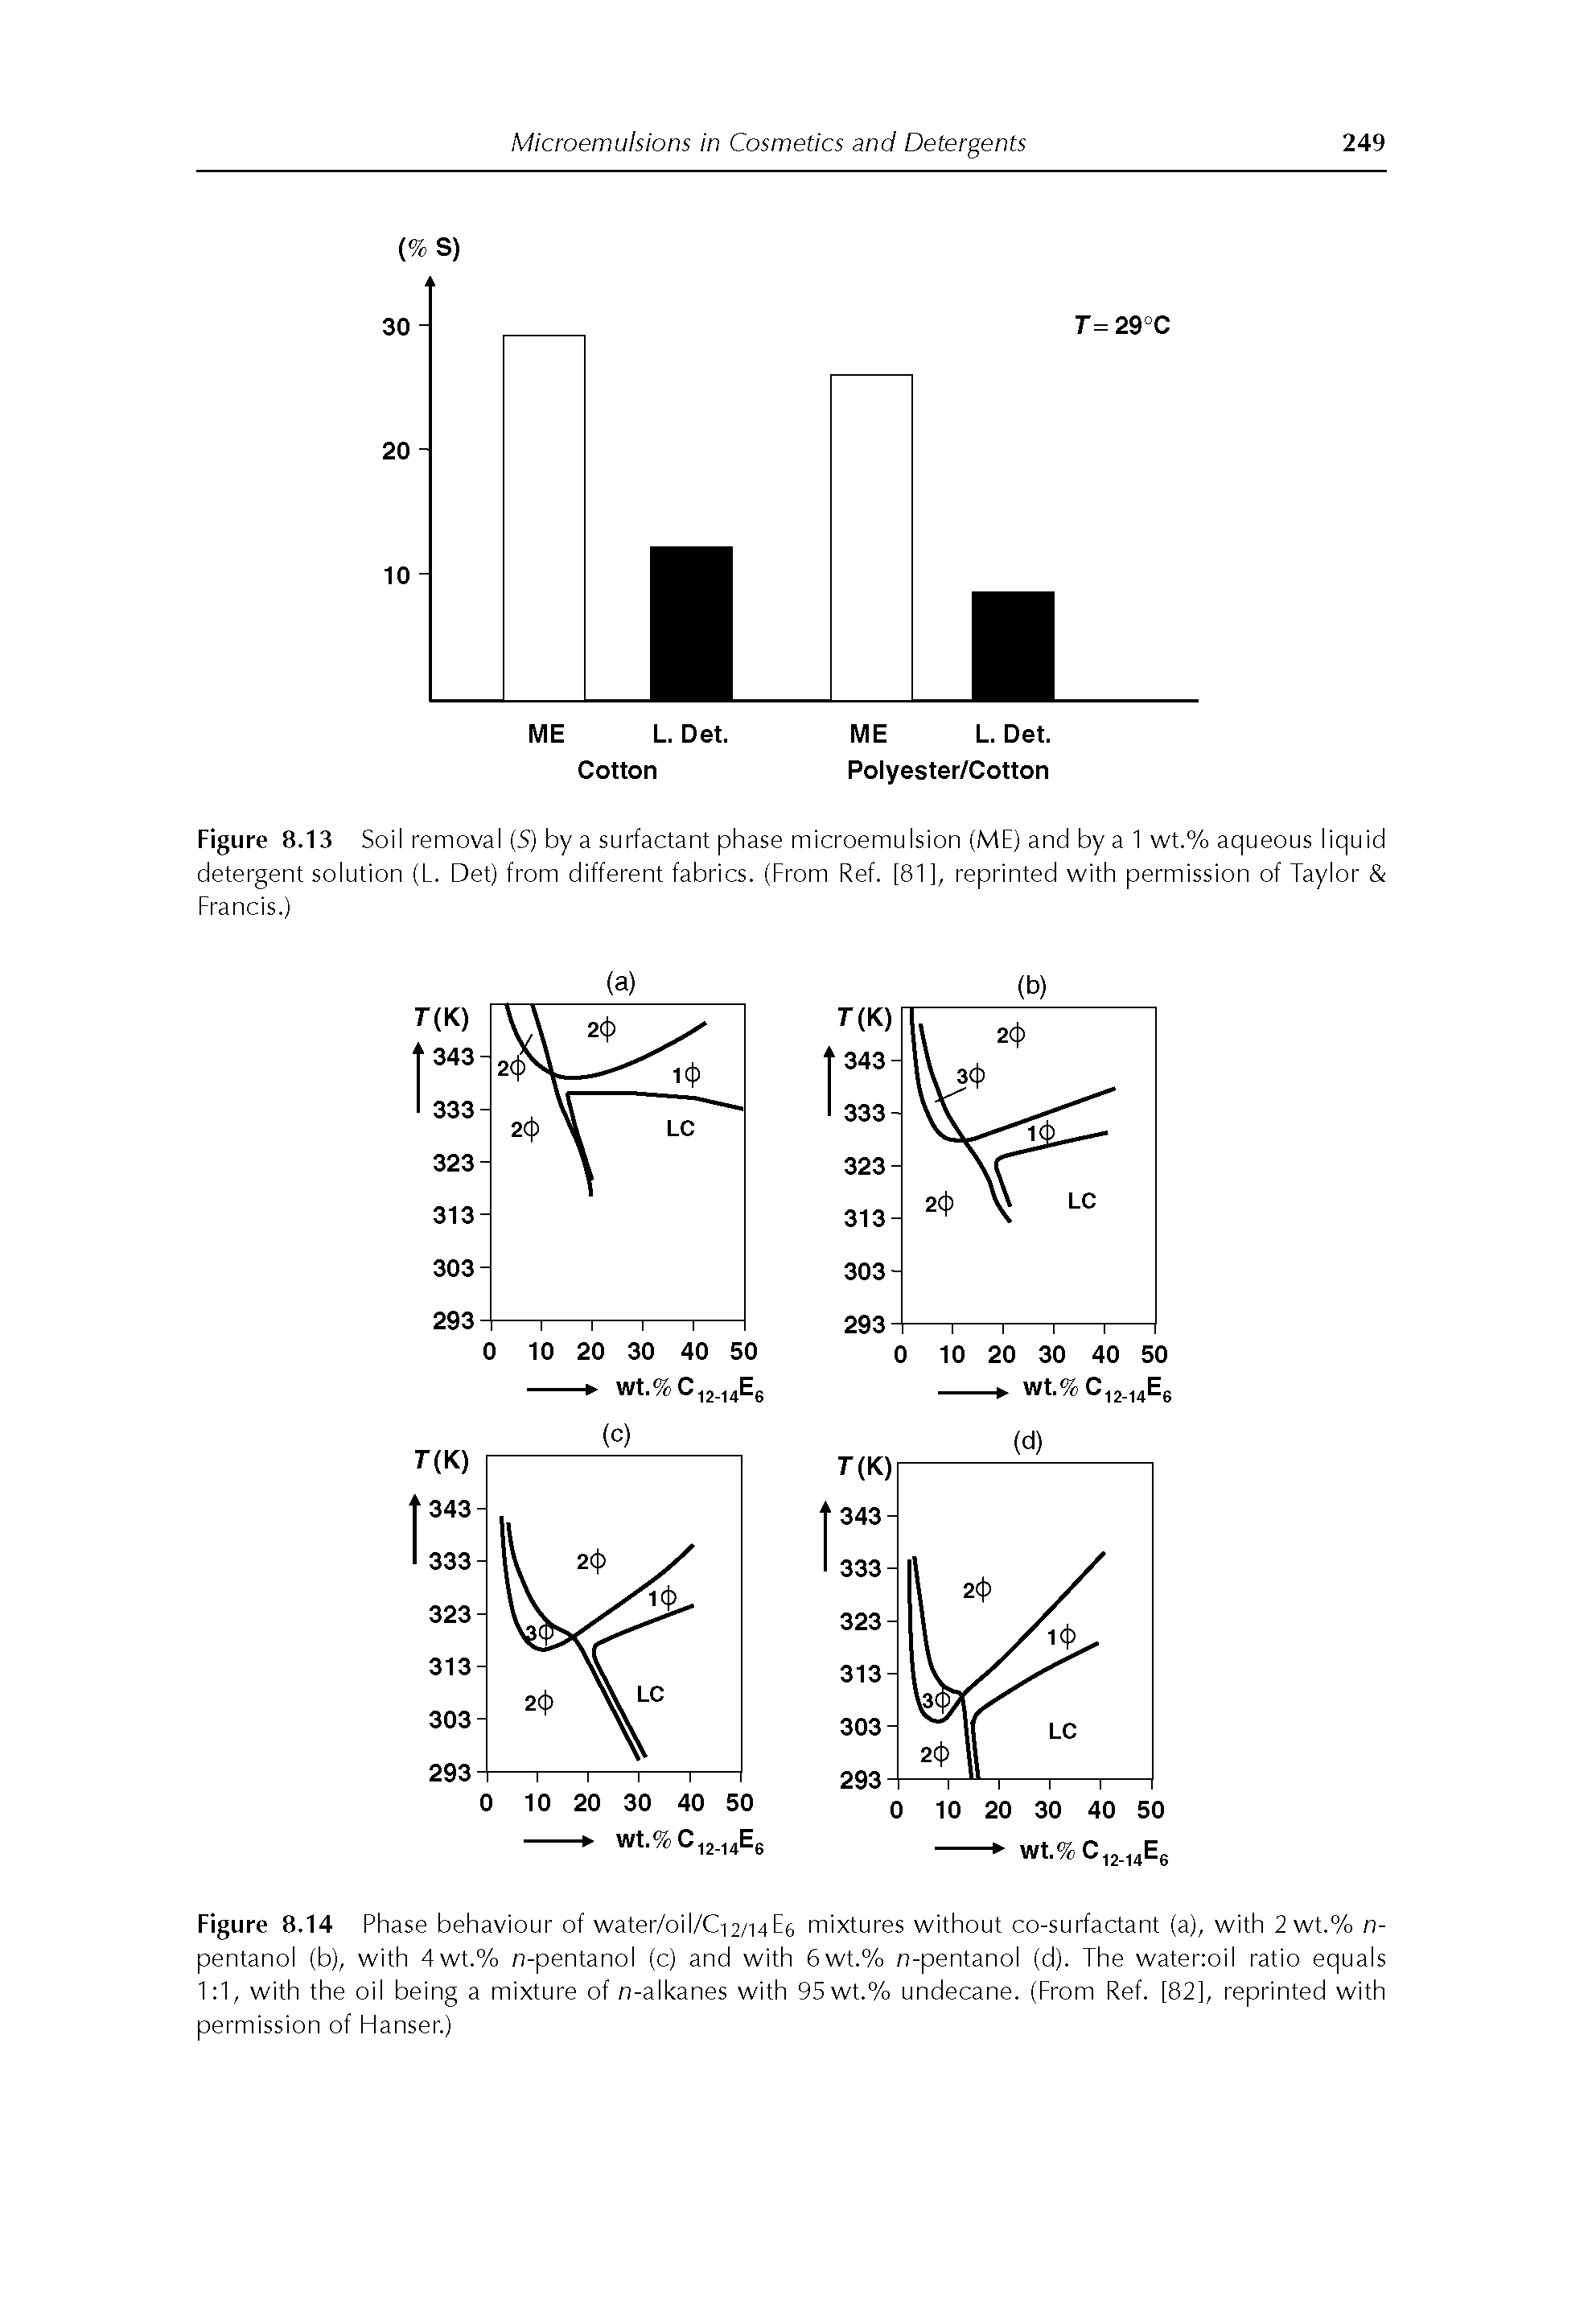 Figure 8.14 Phase behaviour of water/oil/C- 2mE6 mixtures without co-surfactant (a), with 2 wt.% n-pentanol (b), with 4wt.% n-pentanol (c) and with 6wt.% n-pentanol (d). The water oil ratio equals 1 1, with the oil being a mixture of n-alkanes with 95 wt.% undecane. (From Ref. [82], reprinted with permission of Hanser.)...